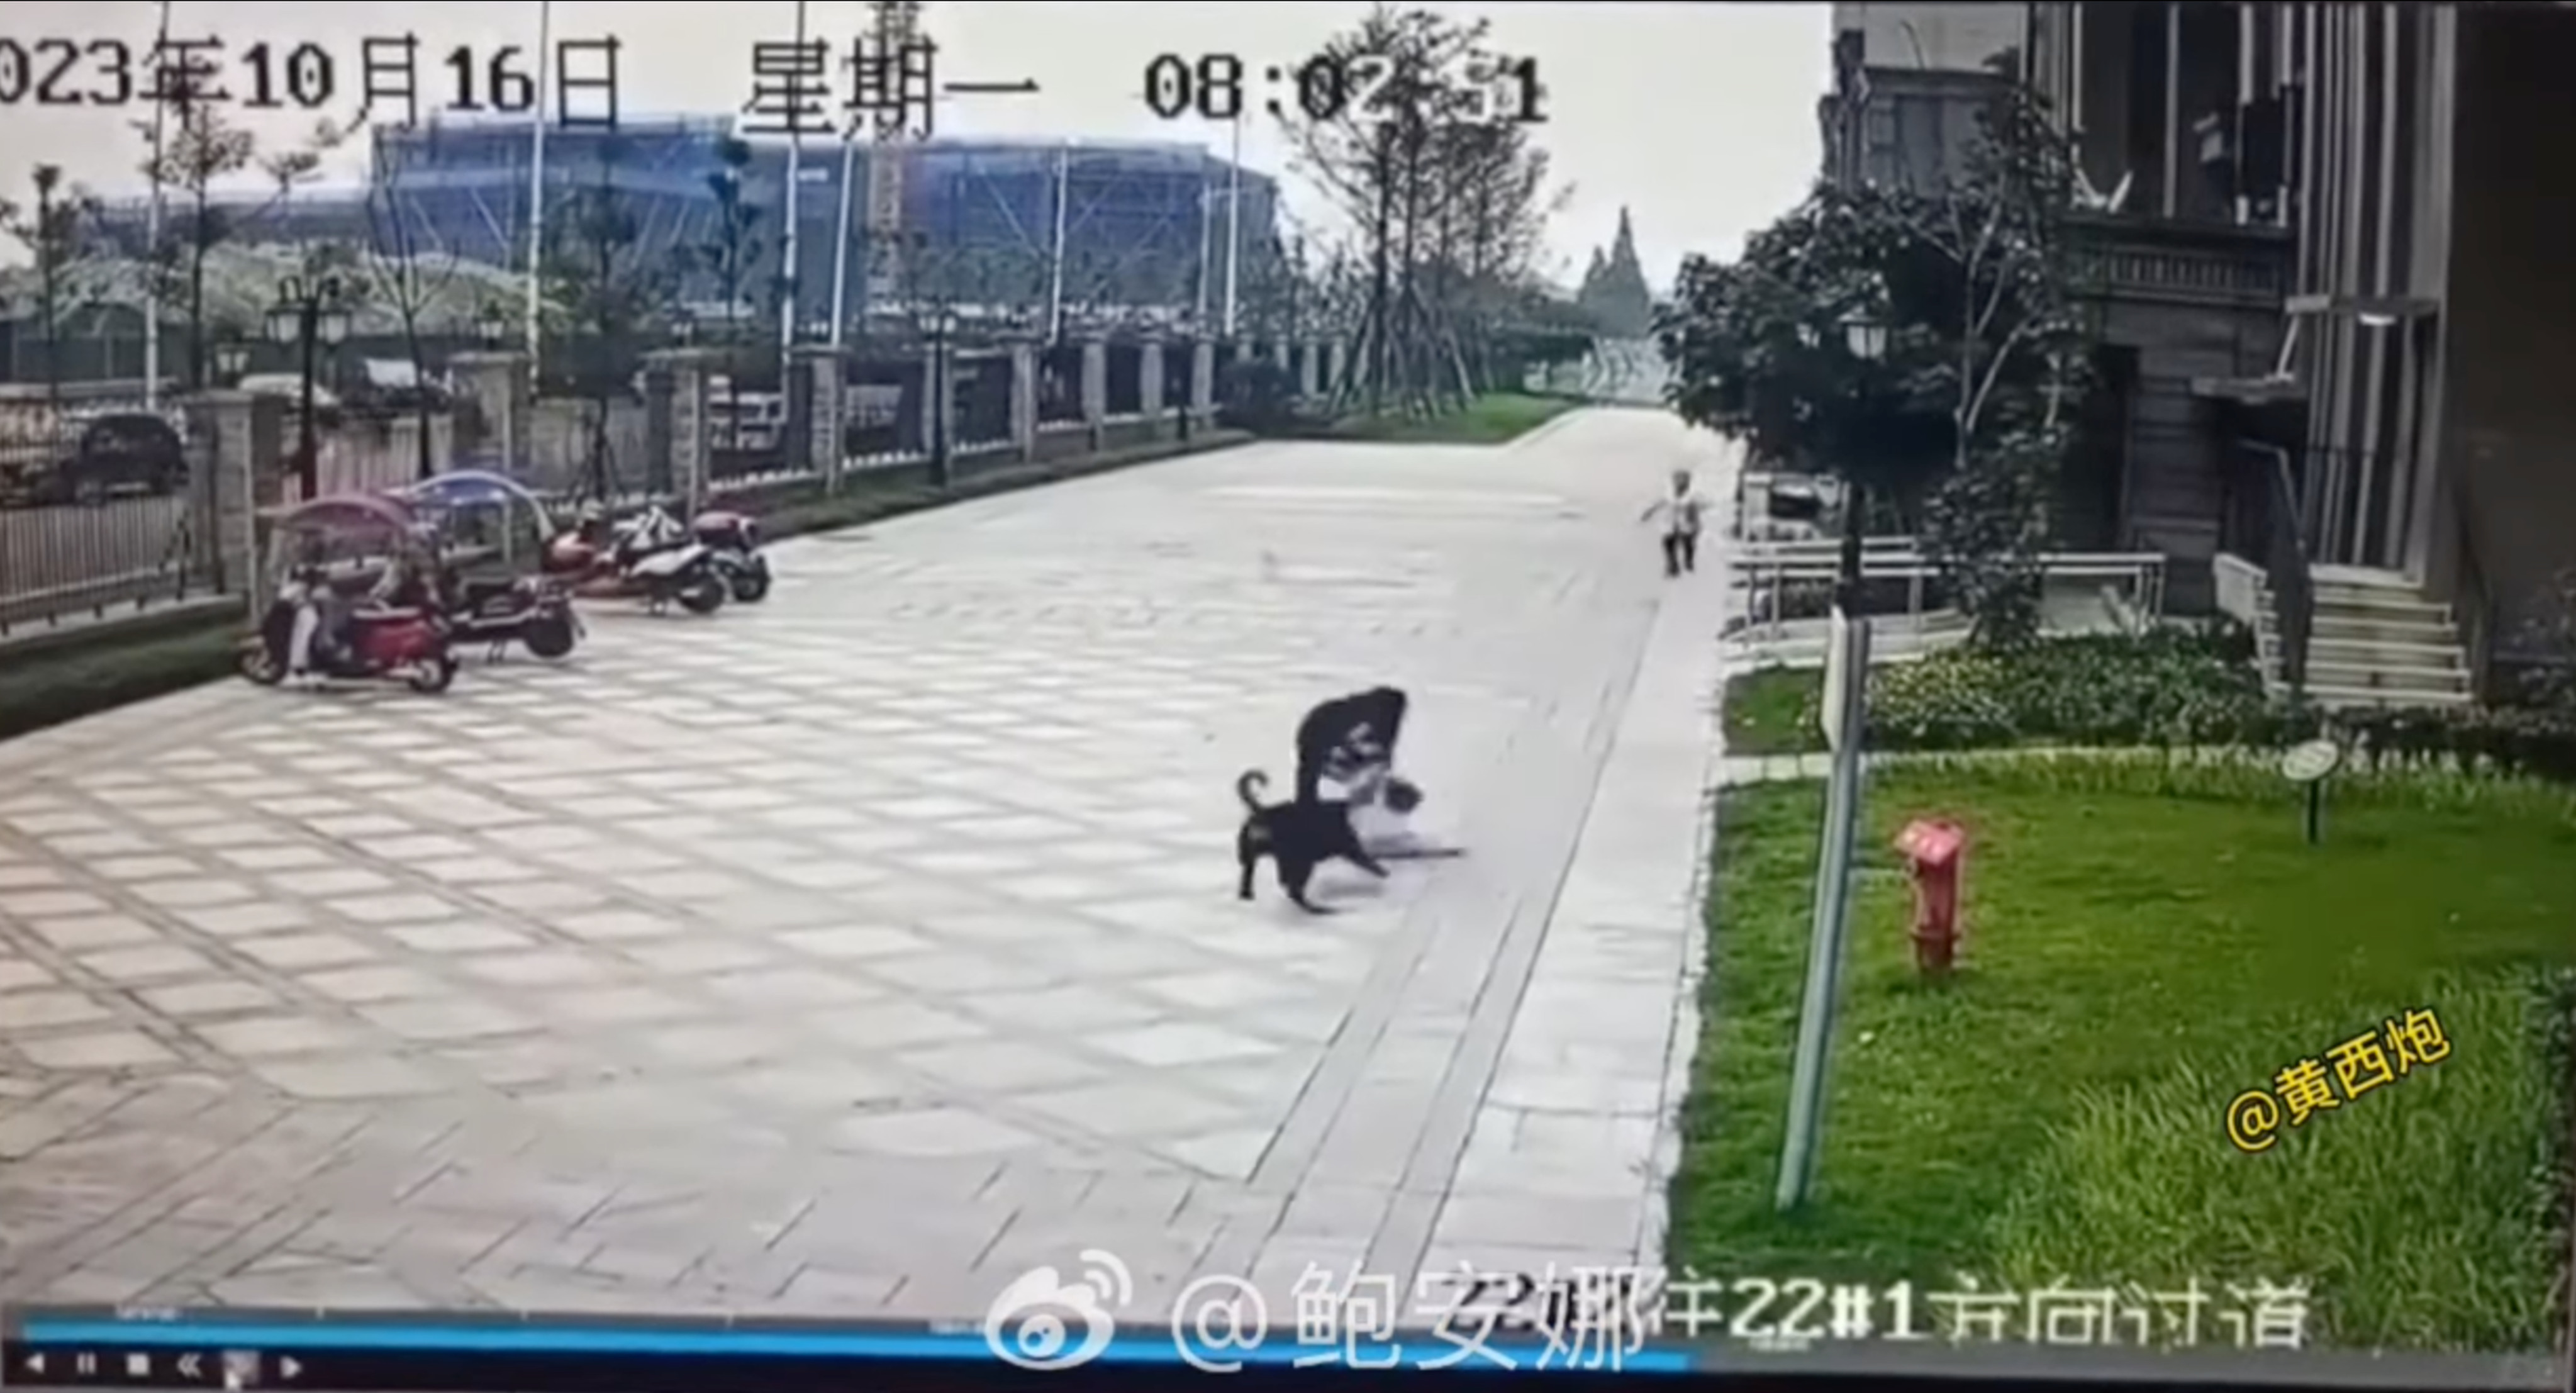 Screengrab from viral security footage shows a woman try to snatch the child away to safety as the dog continues its attack. Photo: Weibo 